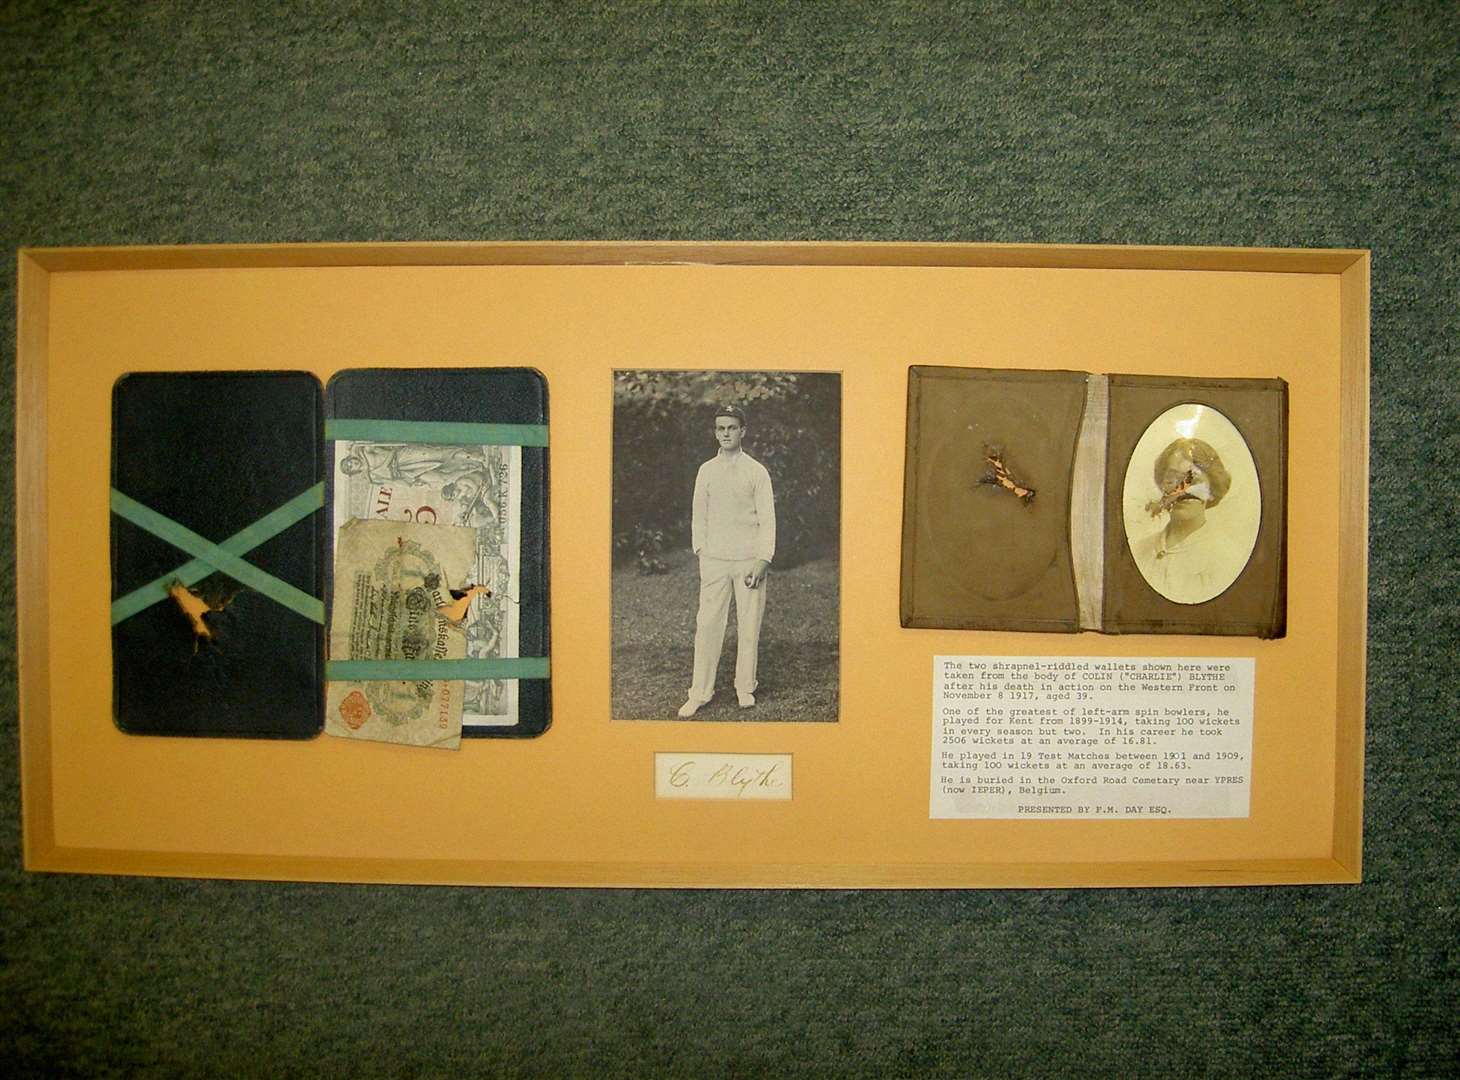 Colin Blythe's wallets which were pierced by shrapnel when he was killed